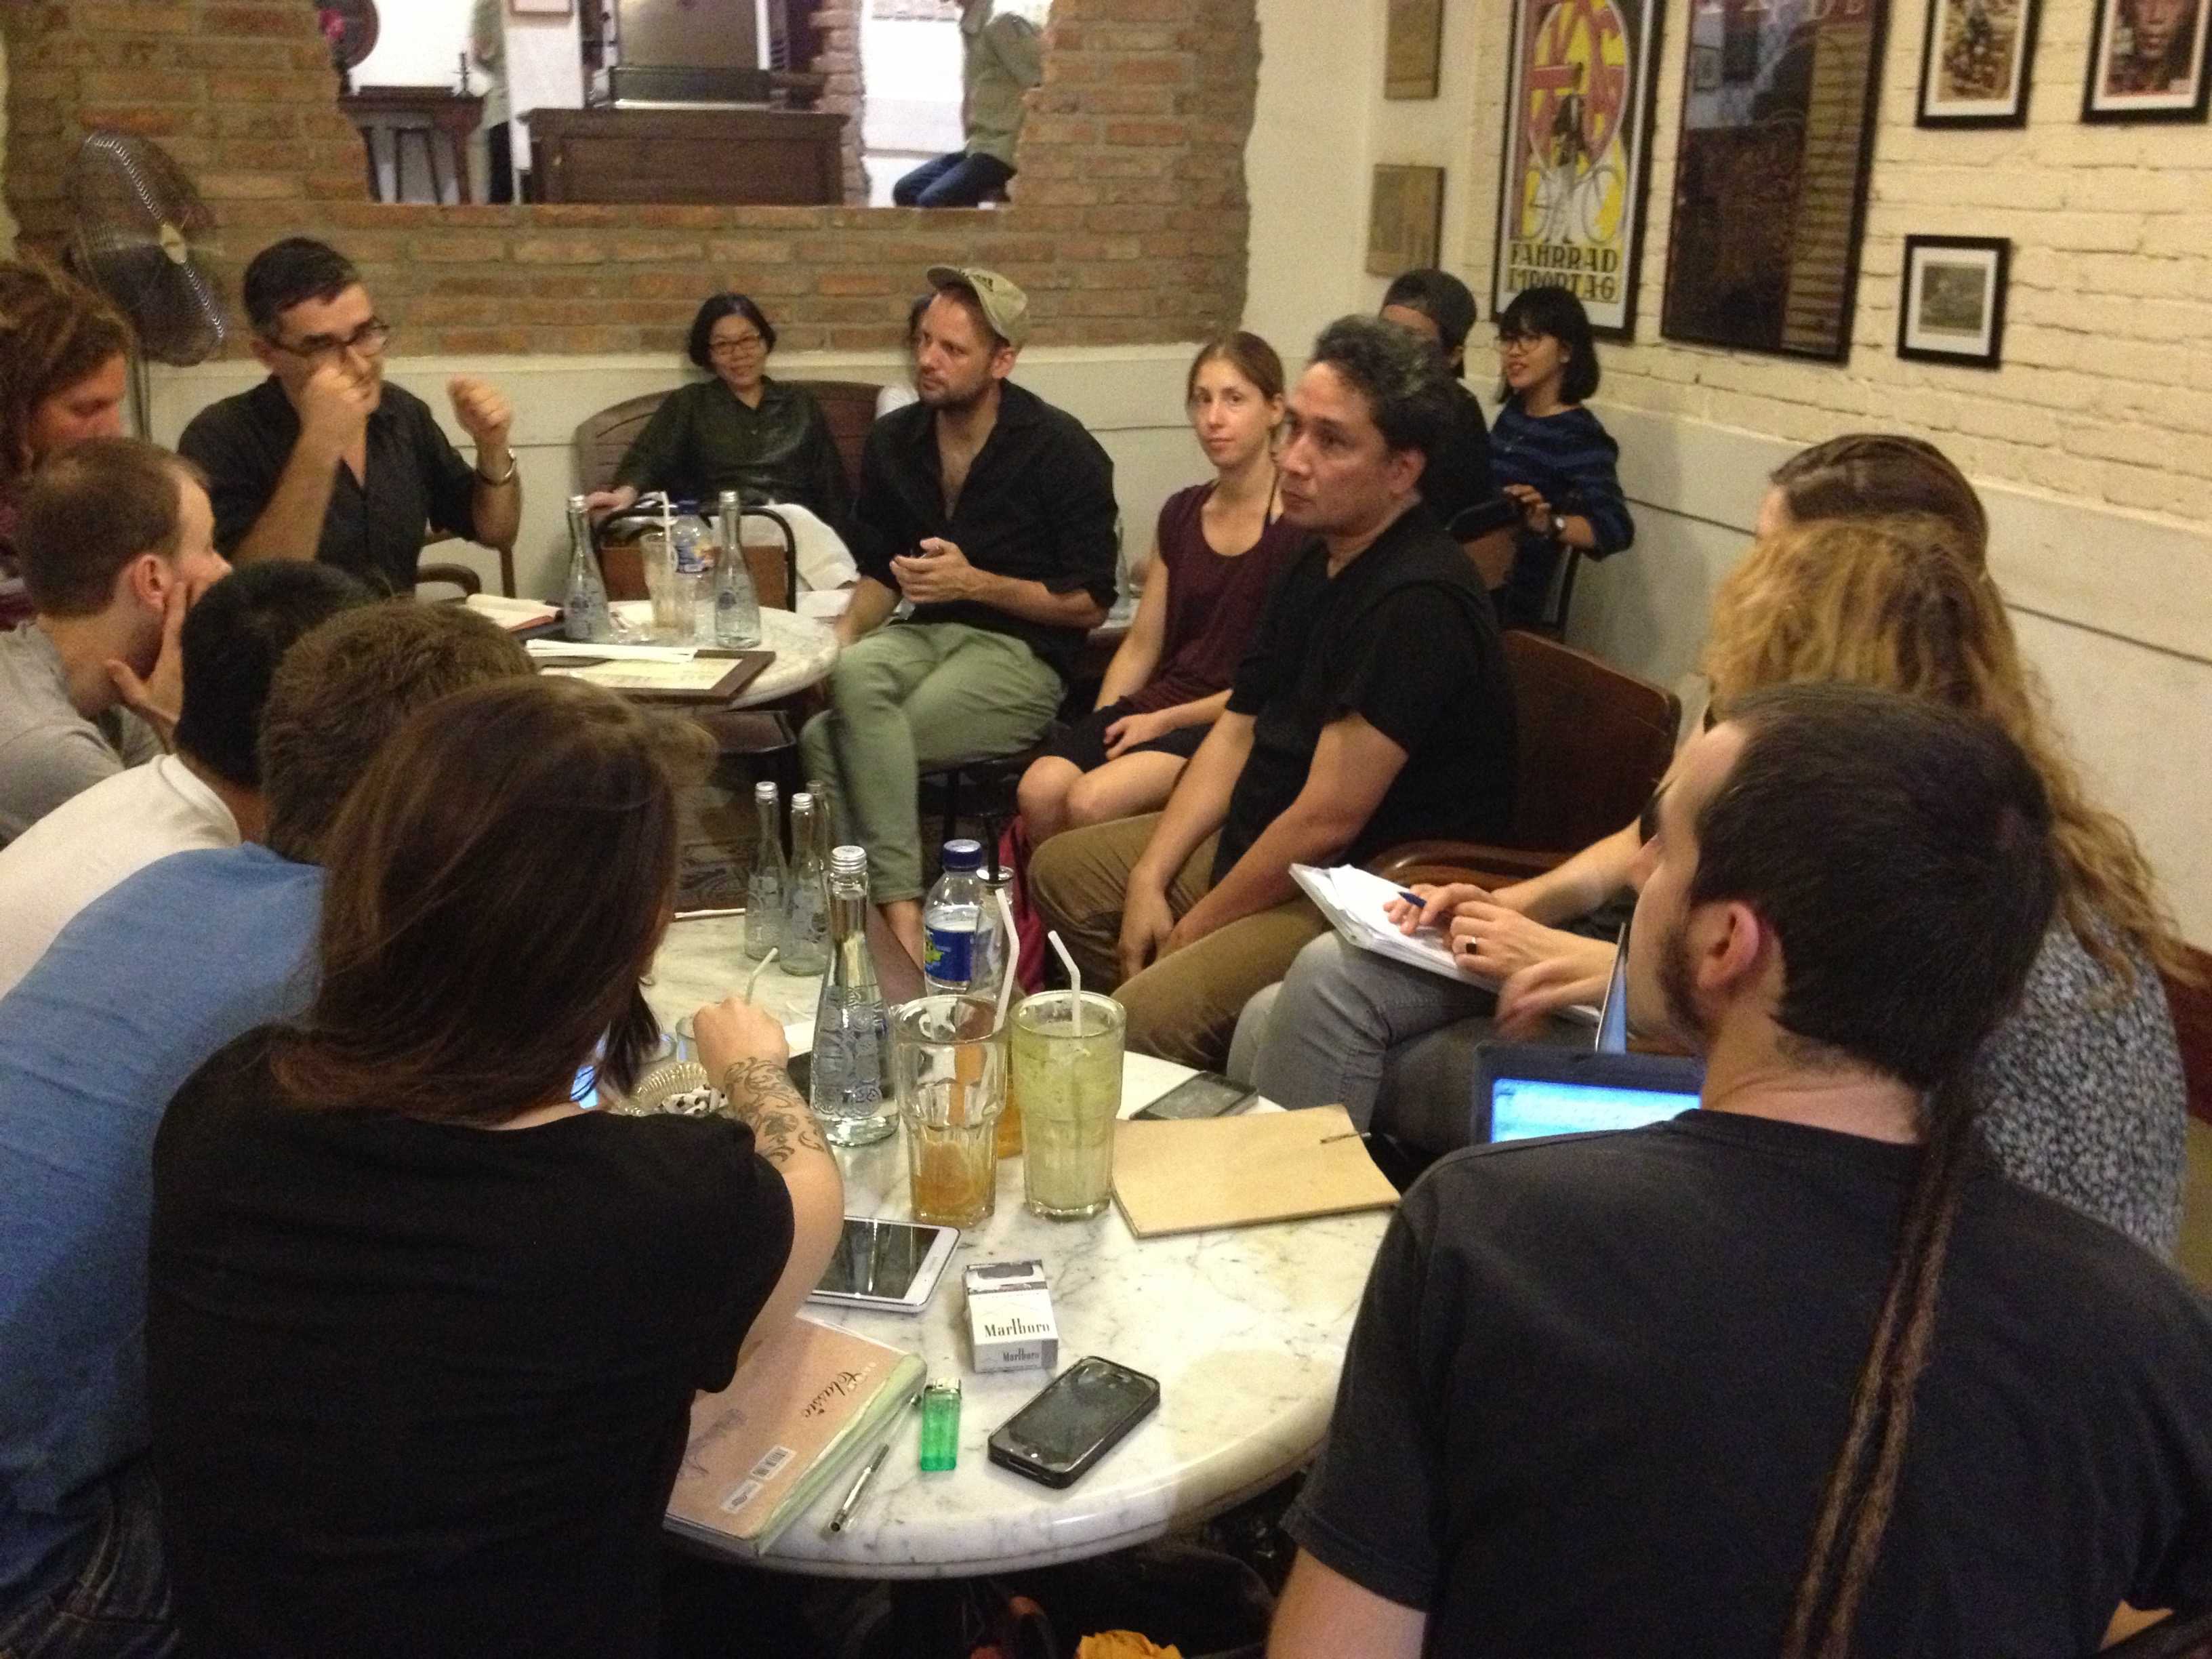 Location, Location, Location in Jakarta: Tirdad Zolghadr and DAI-students in conversation with Indonesian activist Hilmar Farid. November, 2015.